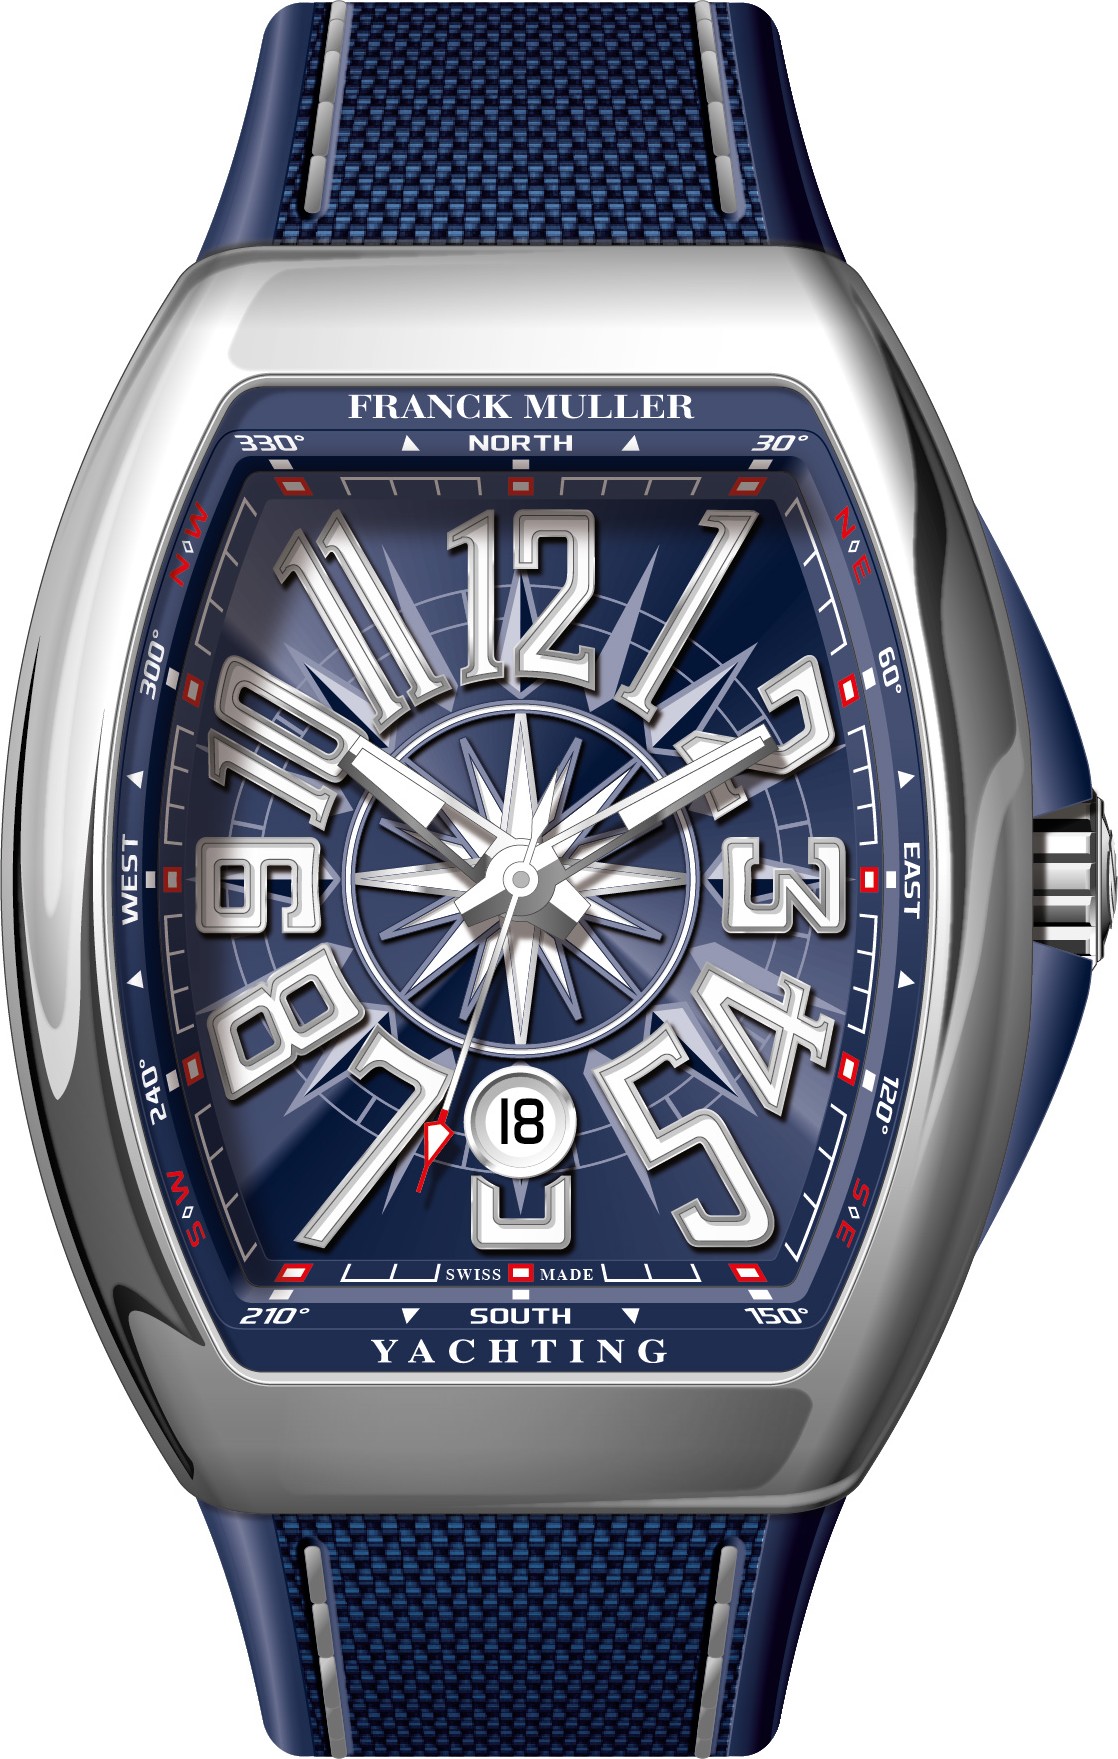 franck muller yachting watch price